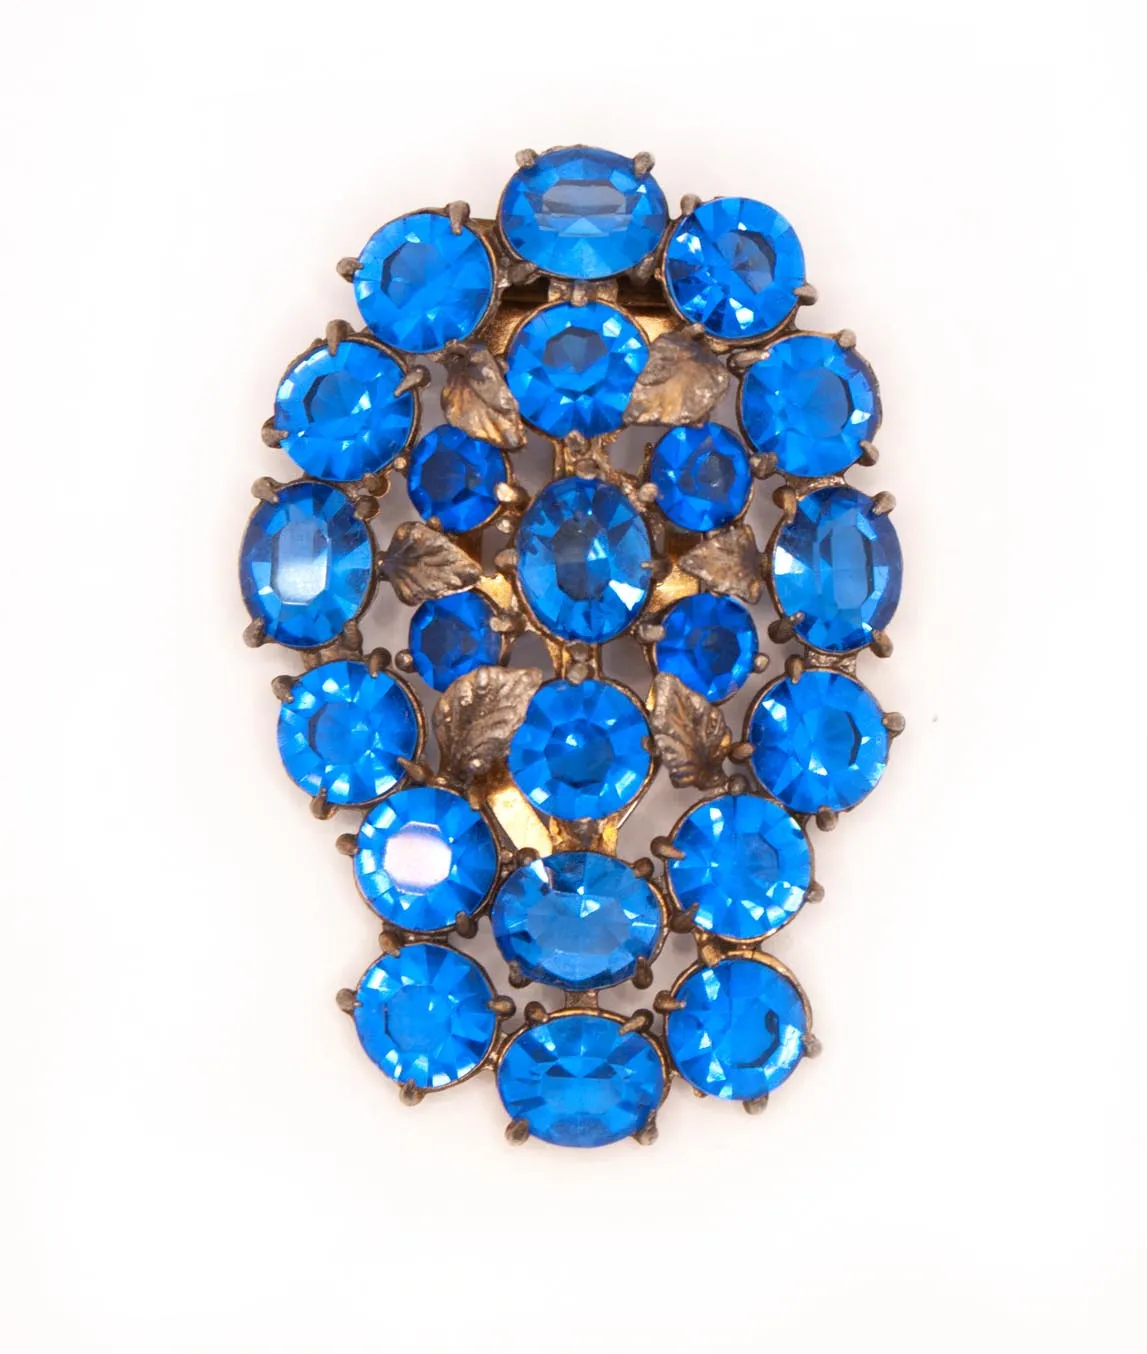 Big blue crystal dress clip with round pastes and metal leaves